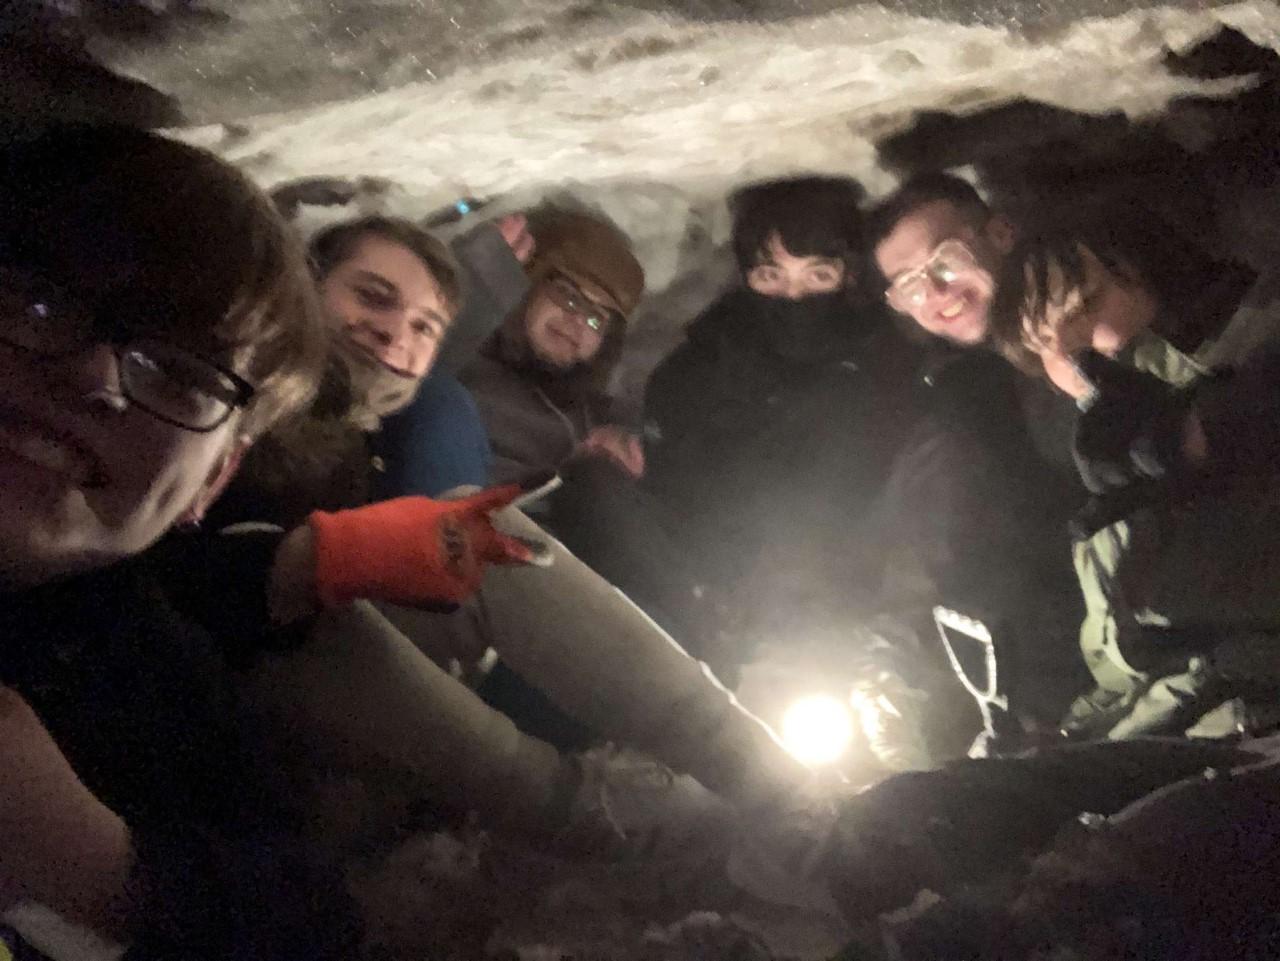 Manchester snow cave photo